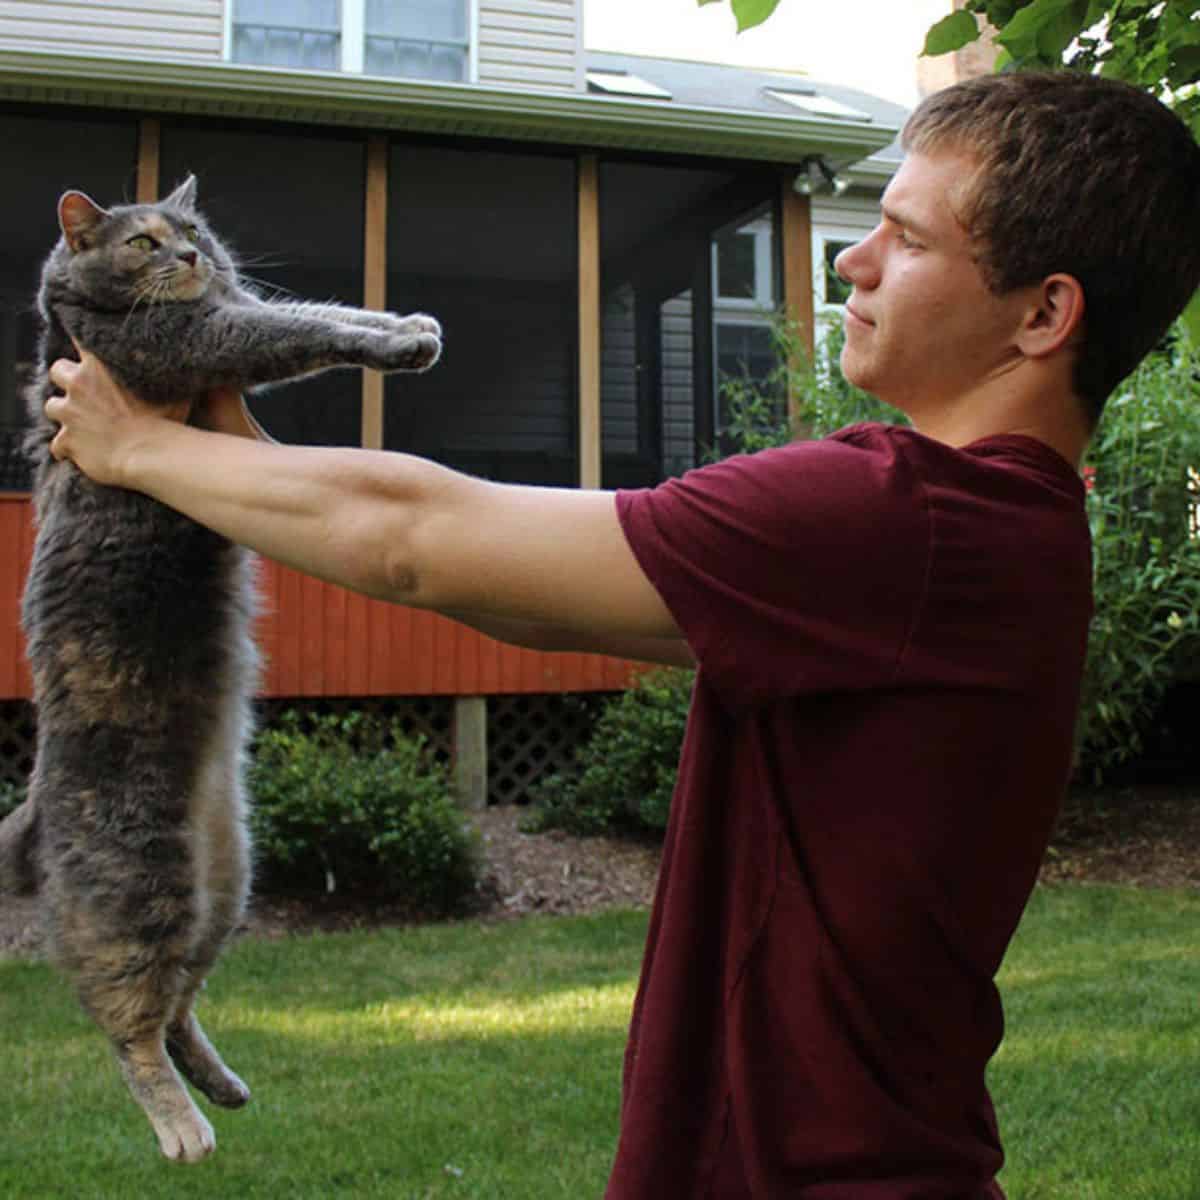 a man holds a cat in his arms and looks at it